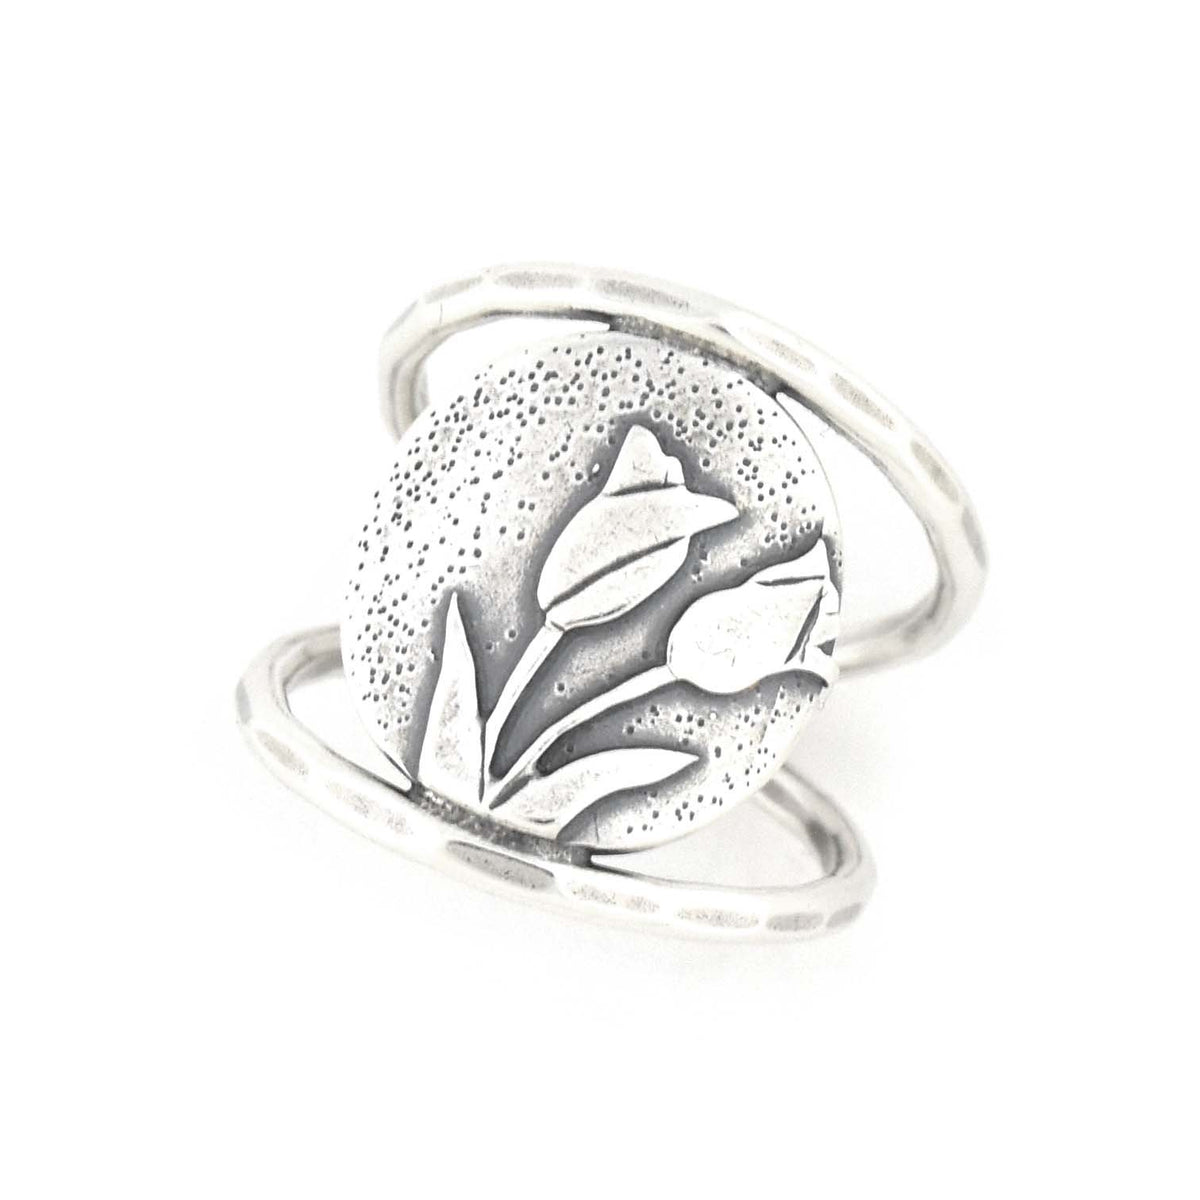 Spring Tulip Bouquet Ring - Ring Select Size 4 5490 - handmade by Beth Millner Jewelry